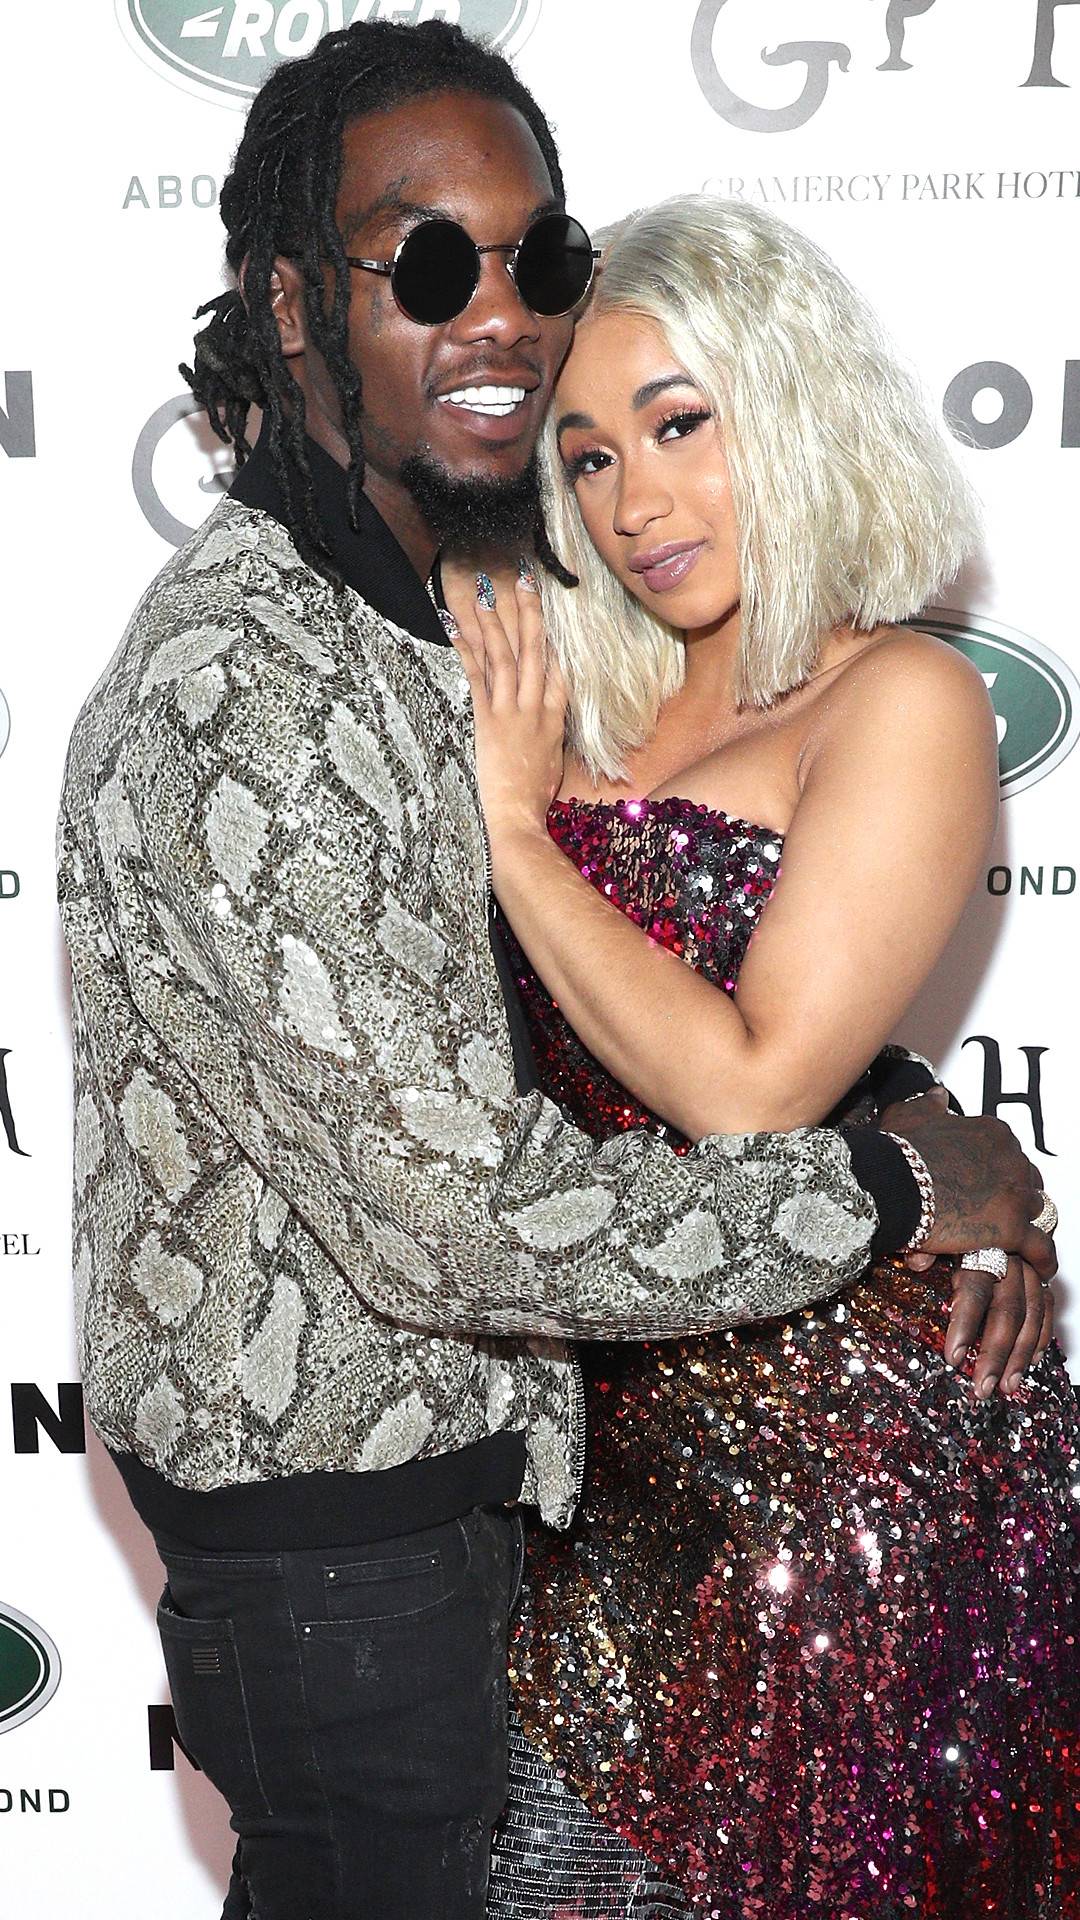 Cardi B Is Pregnant, Expecting First Child With Fiancé Offset. E! News